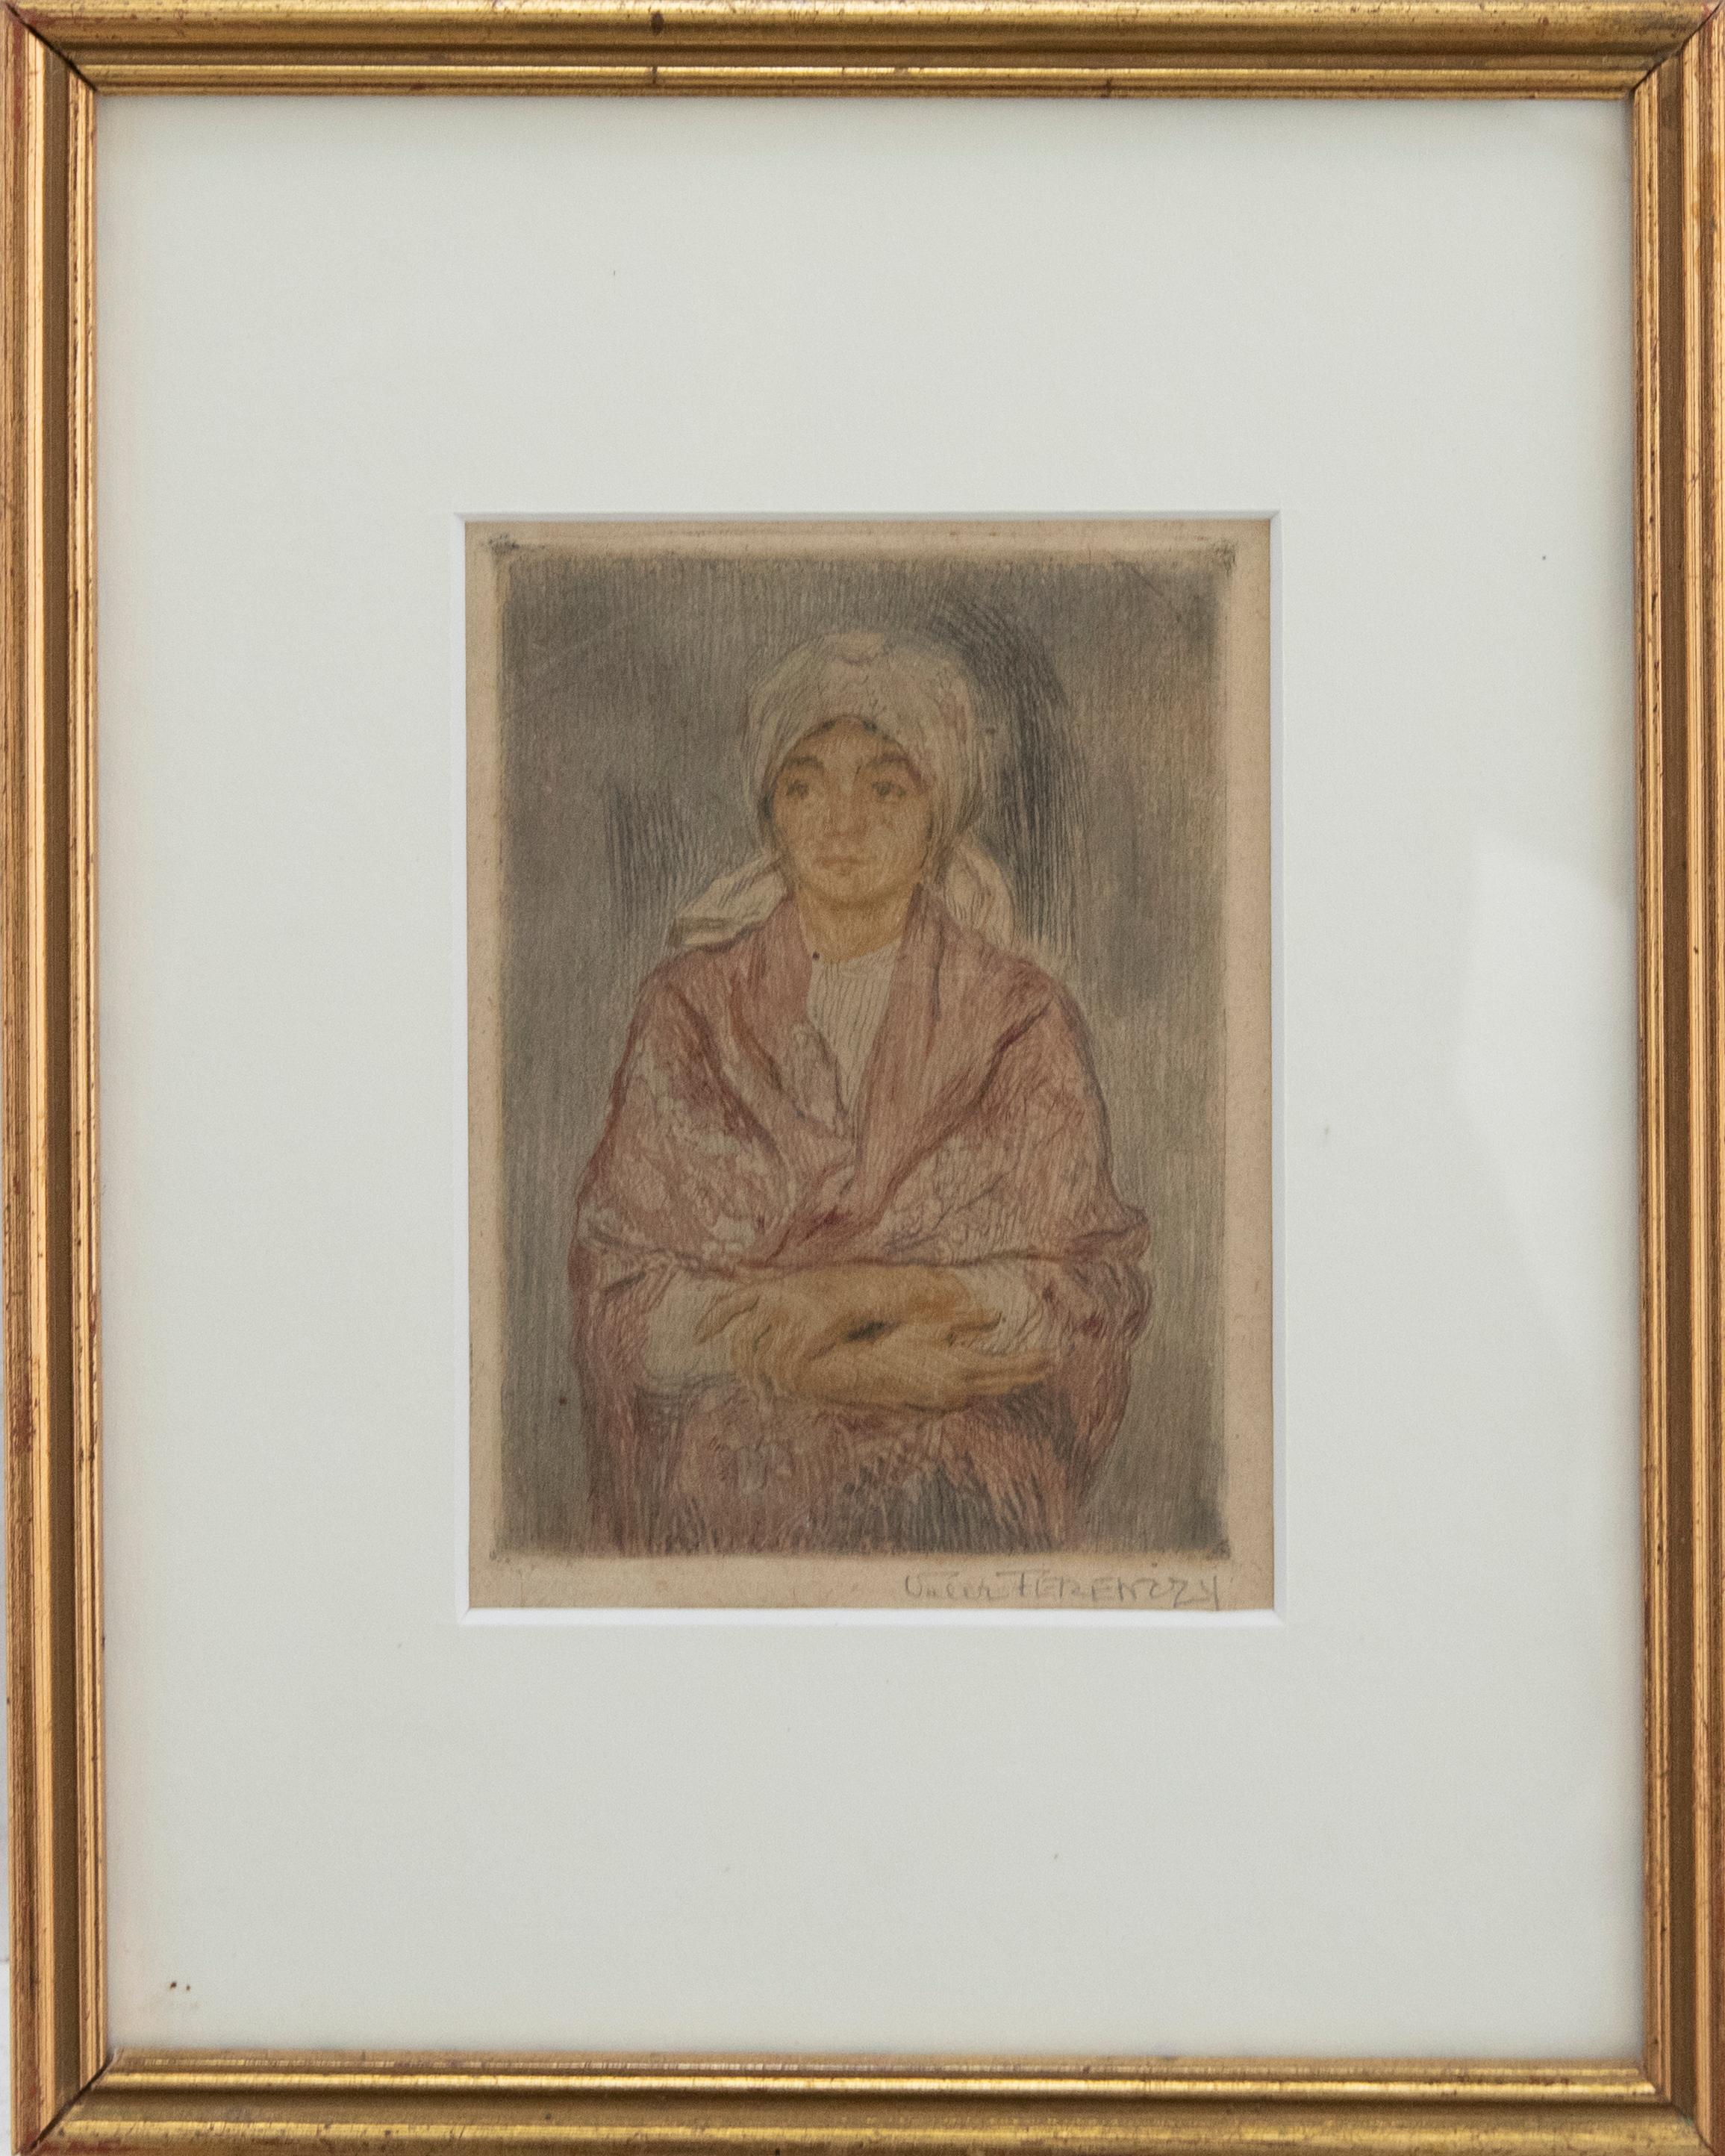 A charming coloured etching of a European lady, wearing a white headscarf and pink shawl. The sitter stands with her arms folded, gazing to left with a subdued smile. The artist's etched line brings texture to the print and is prominent part of the